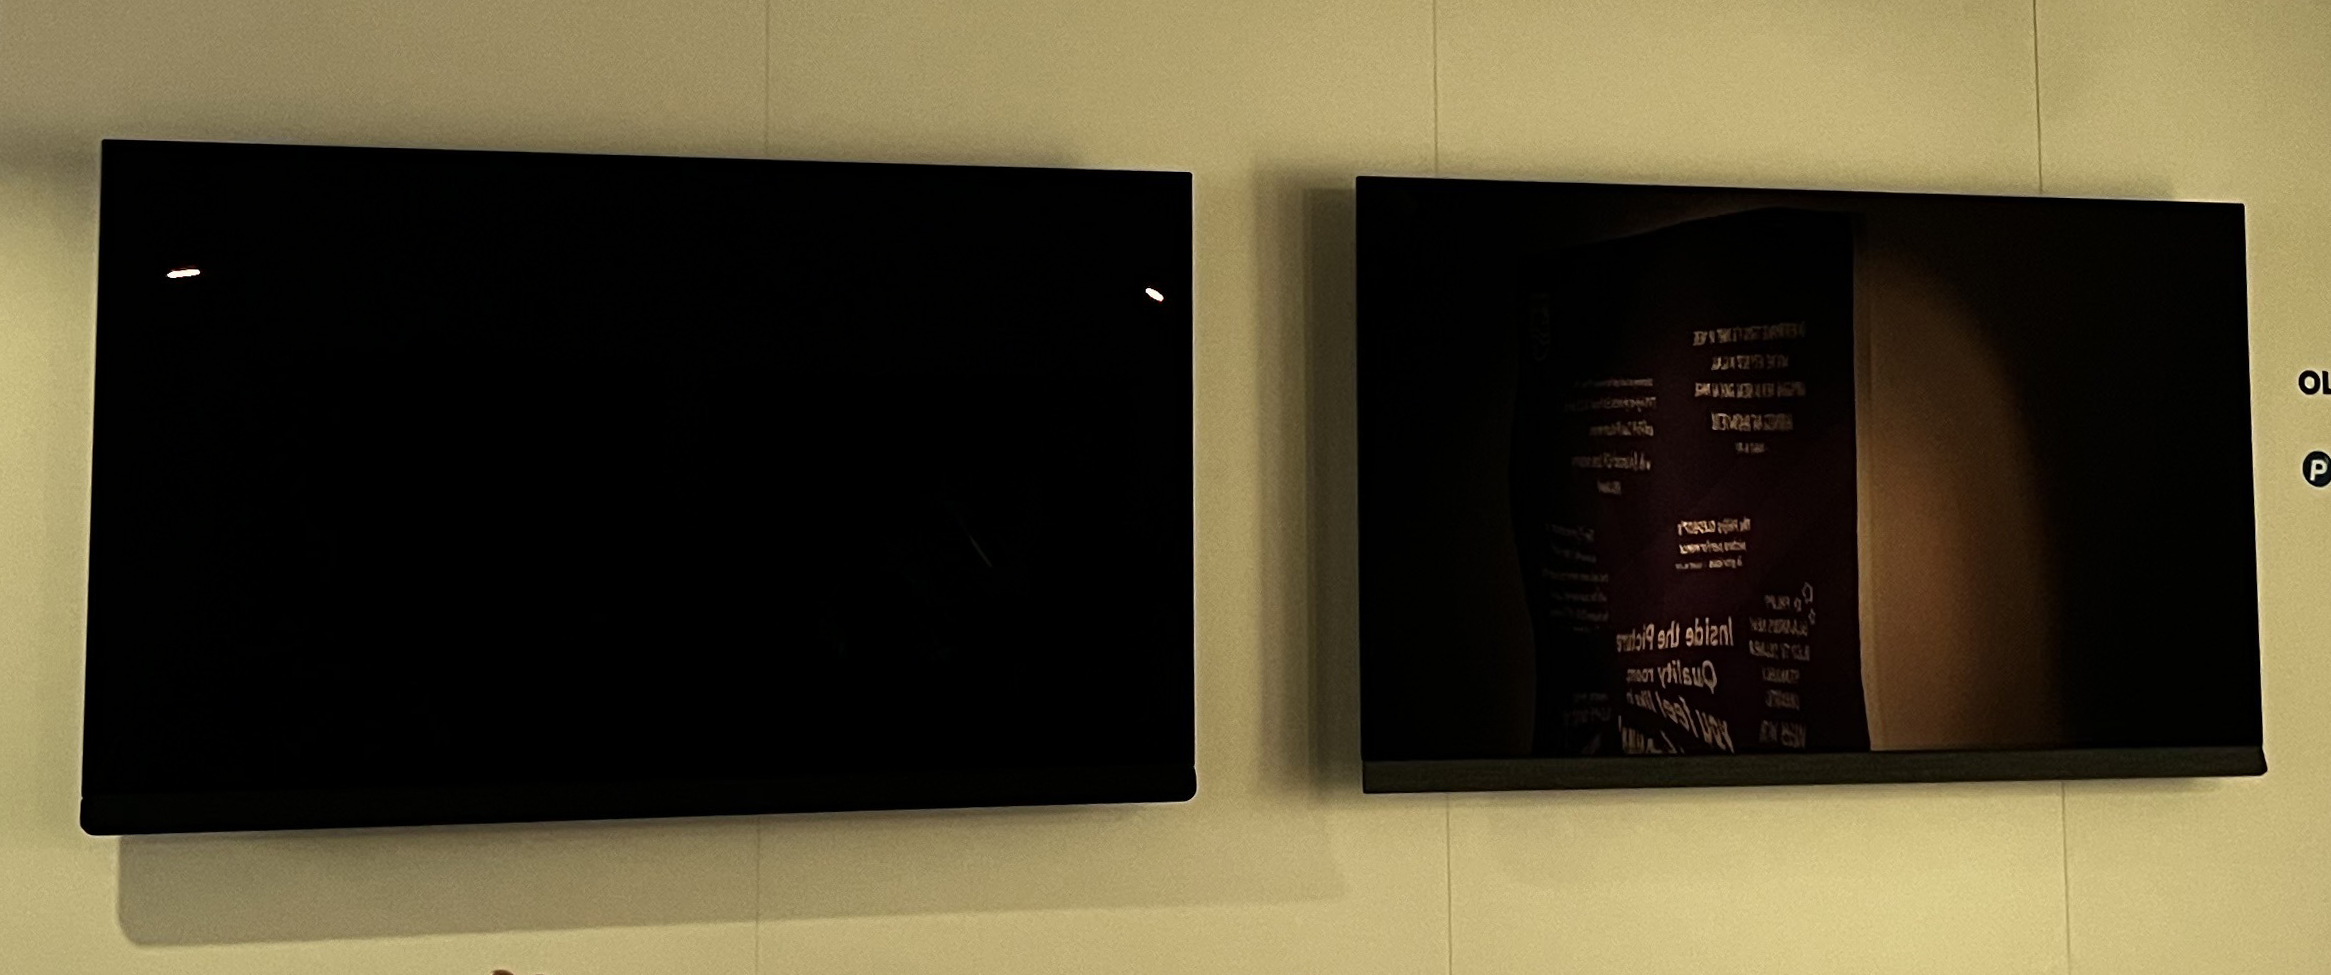 Philips OLED908 on the left without glare, Philips OLED907 TV on the right with strong reflections